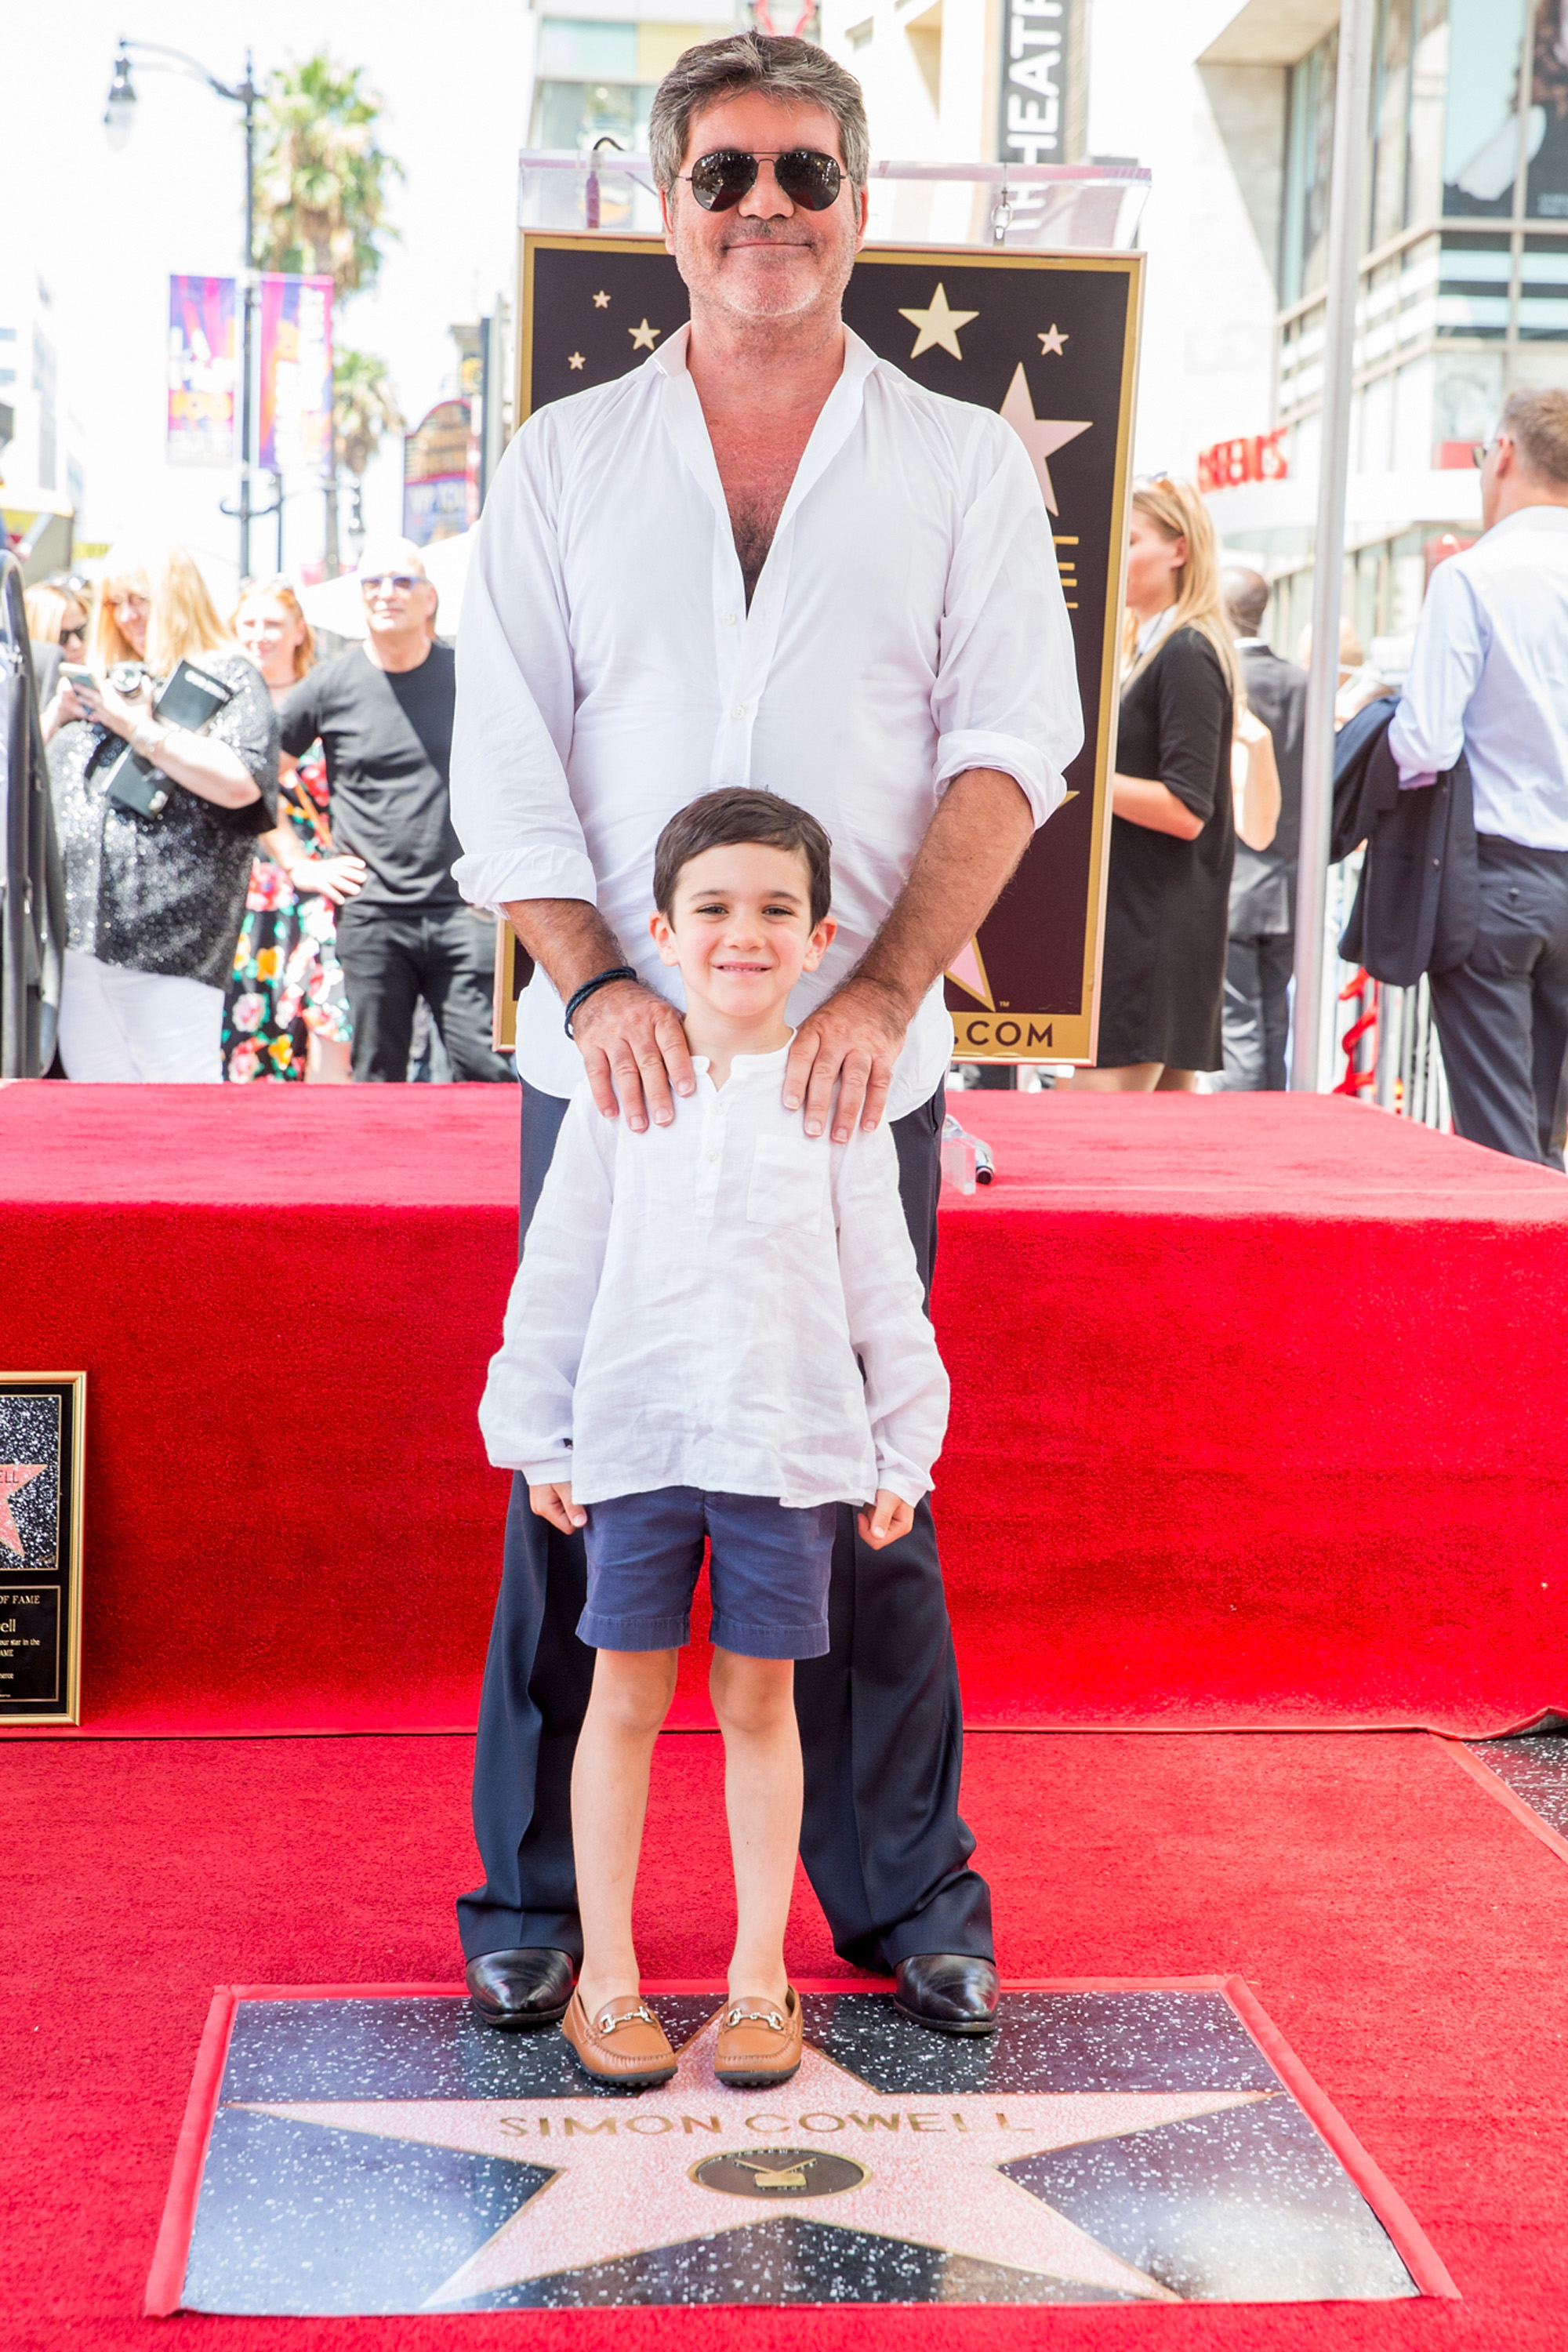 Oh God, No”: Simon Cowell On His Son's Dream of Becoming a Future Rock Star